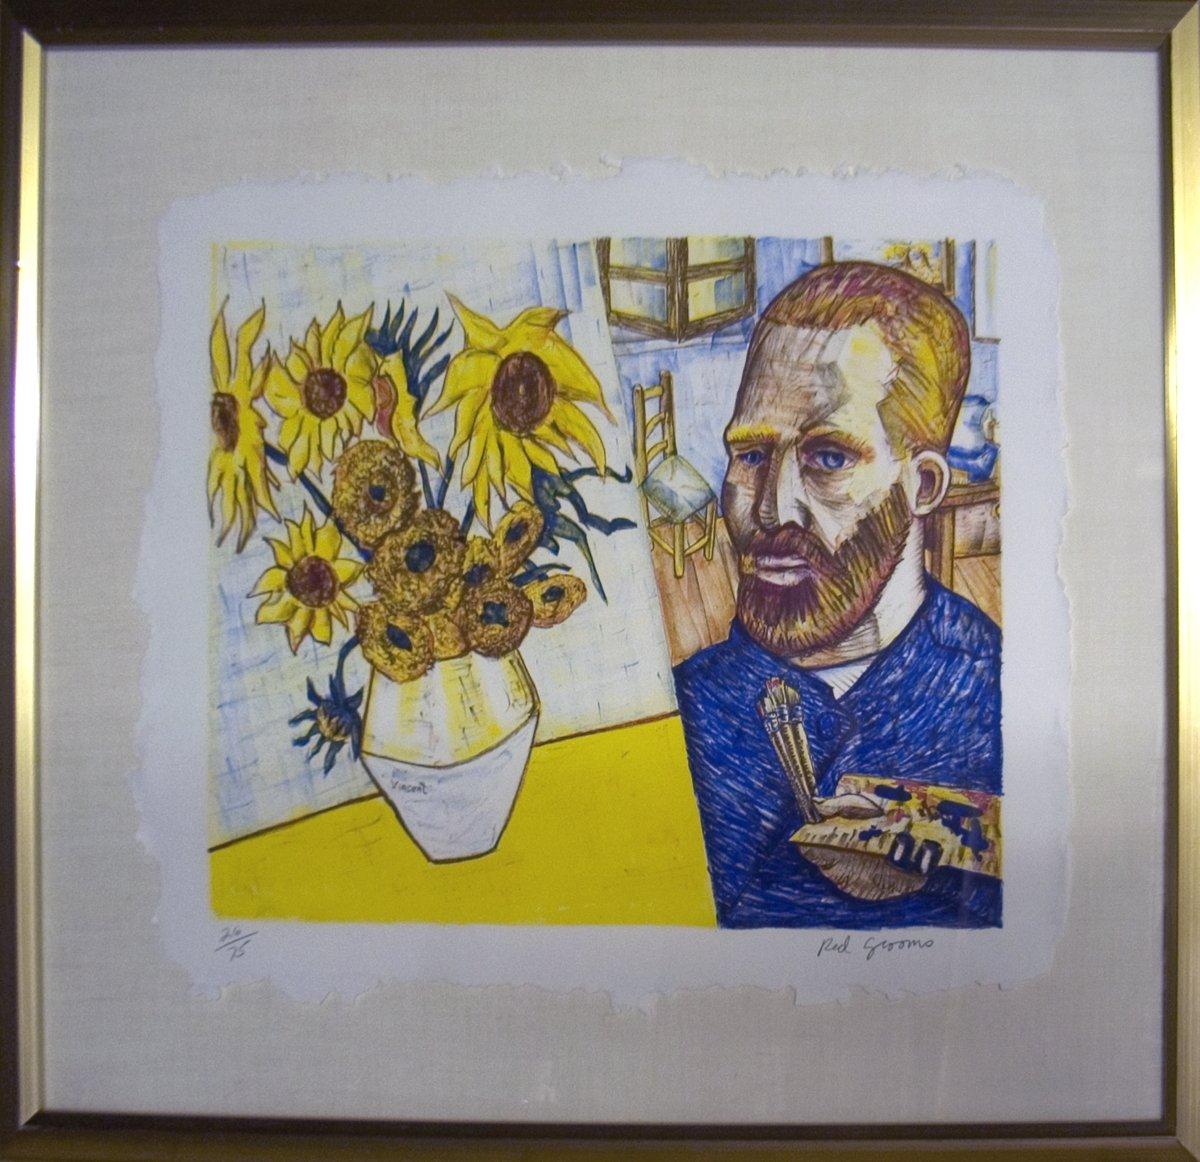 1988 Red Grooms 'van Gogh with Sunflowers' HAND SIGNED